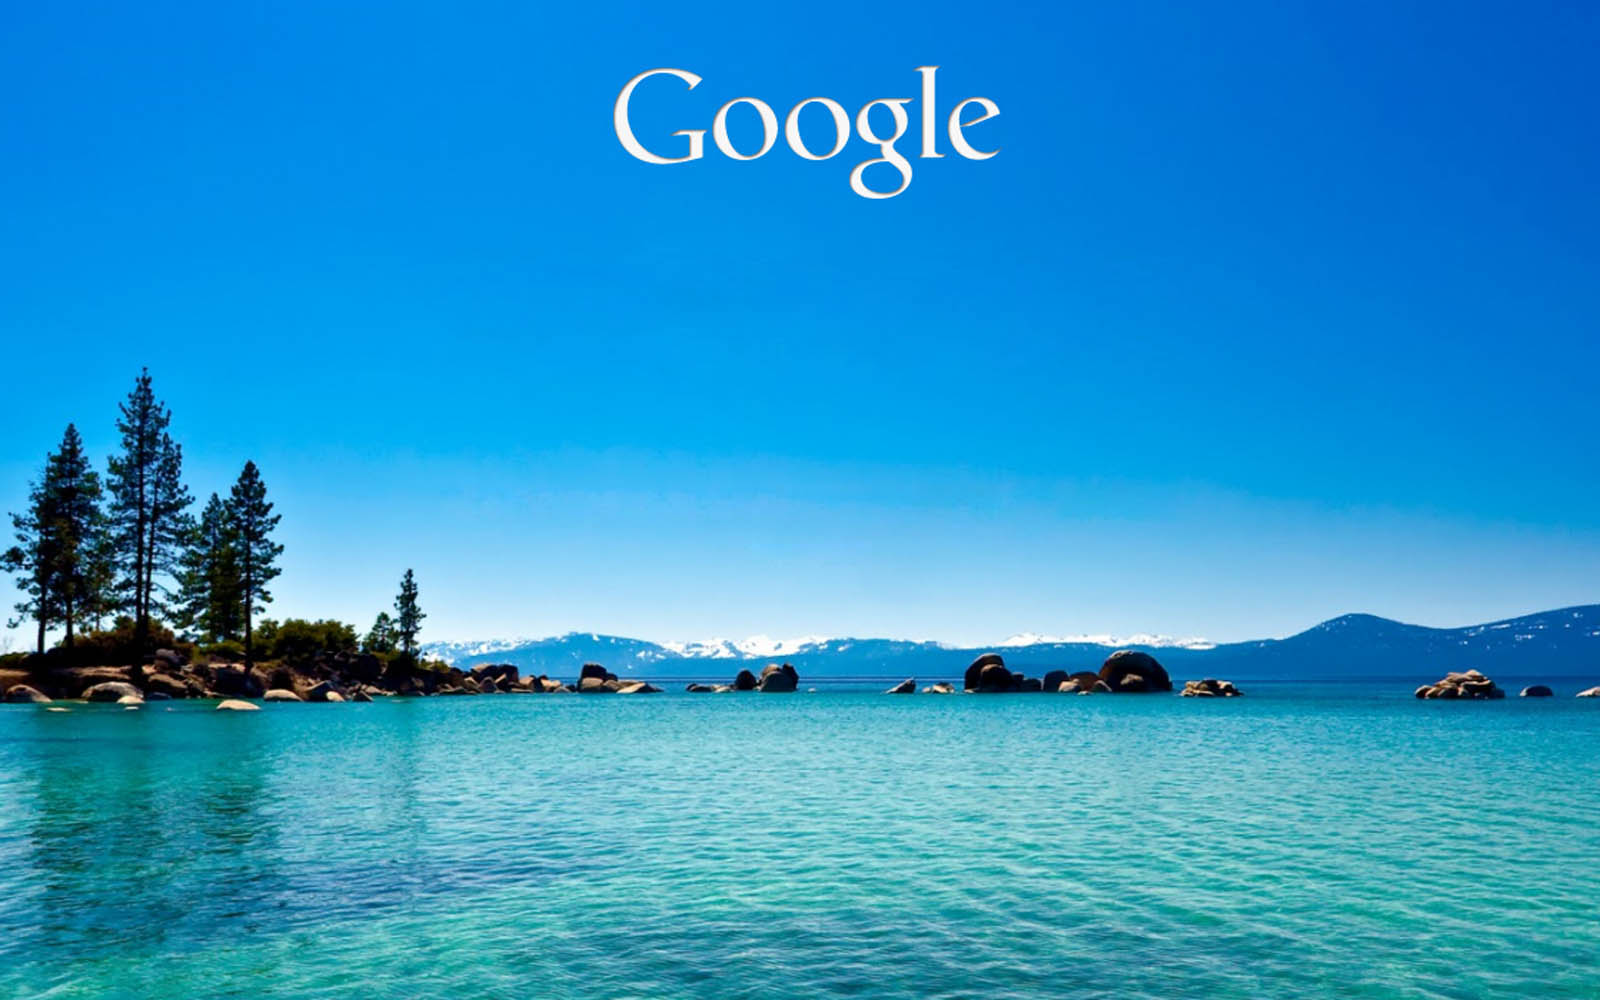 Google Background Wallpaper Pictures Gallery